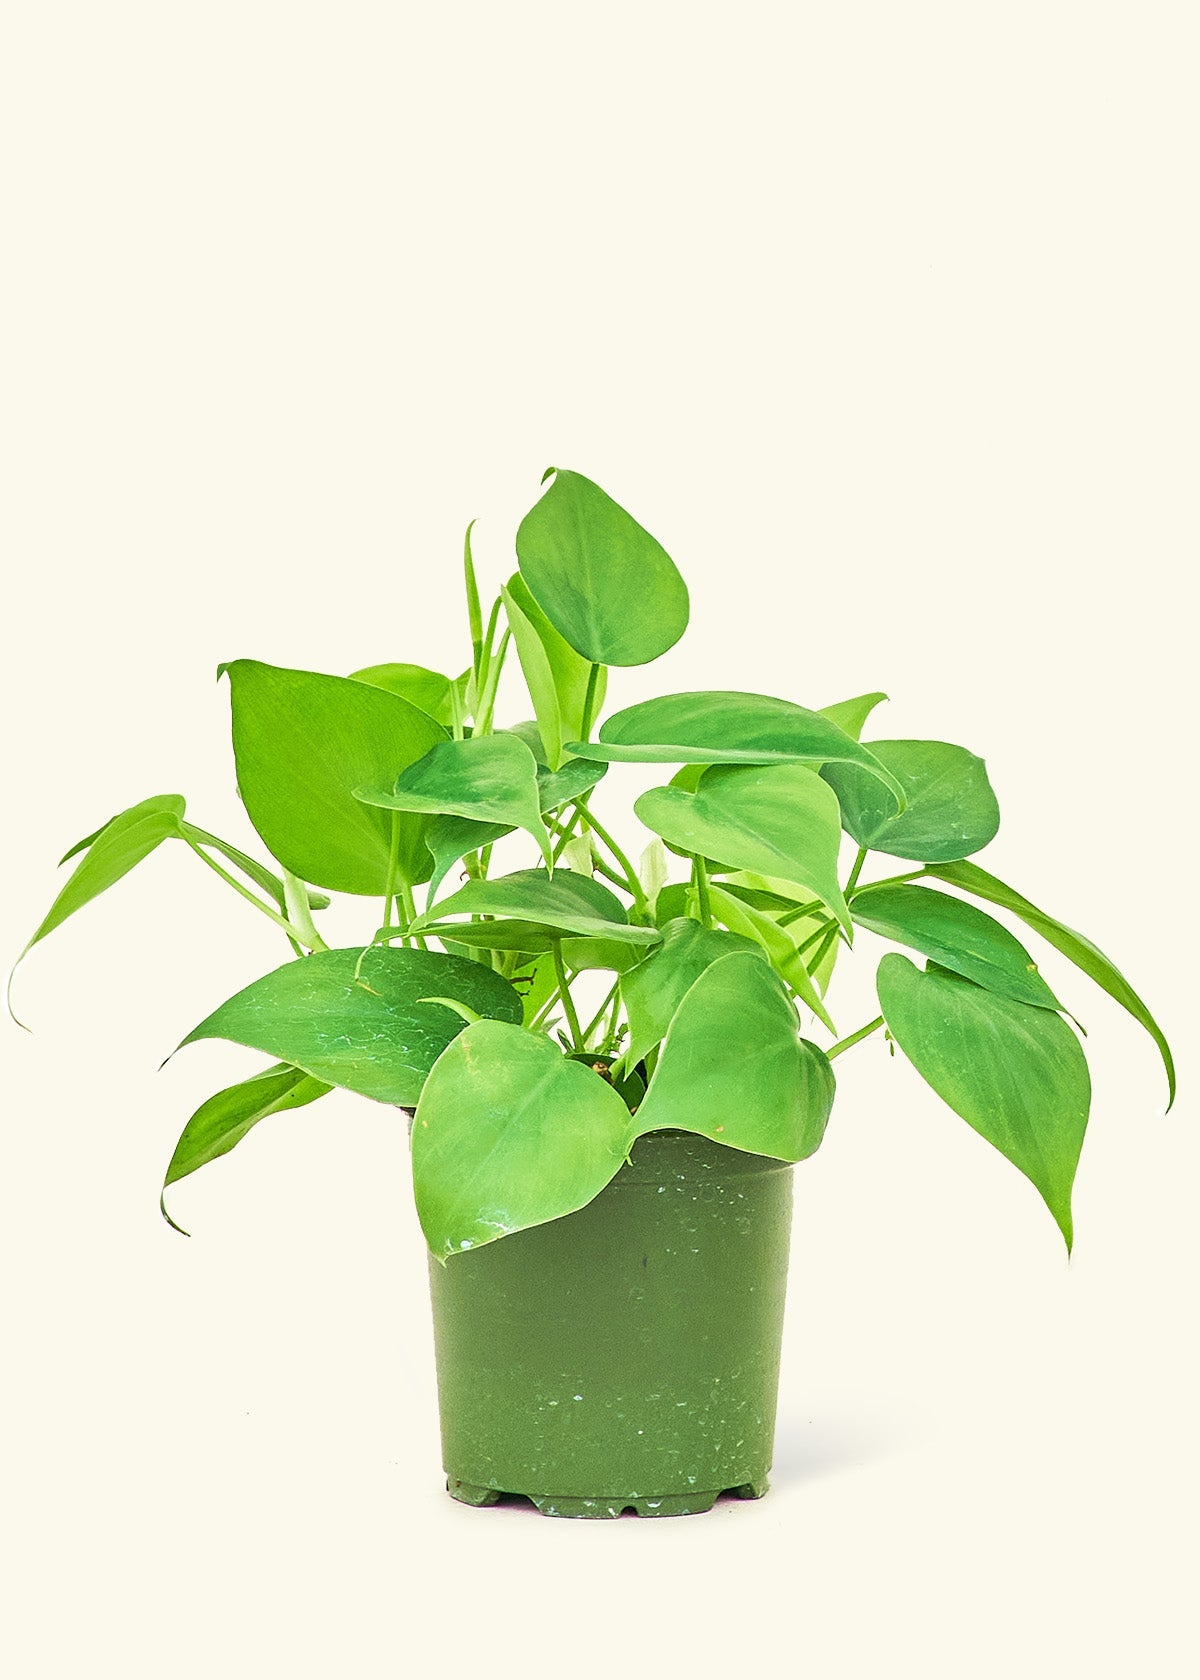 Small Sweetheart Philodendron (Philodendron cordatum)